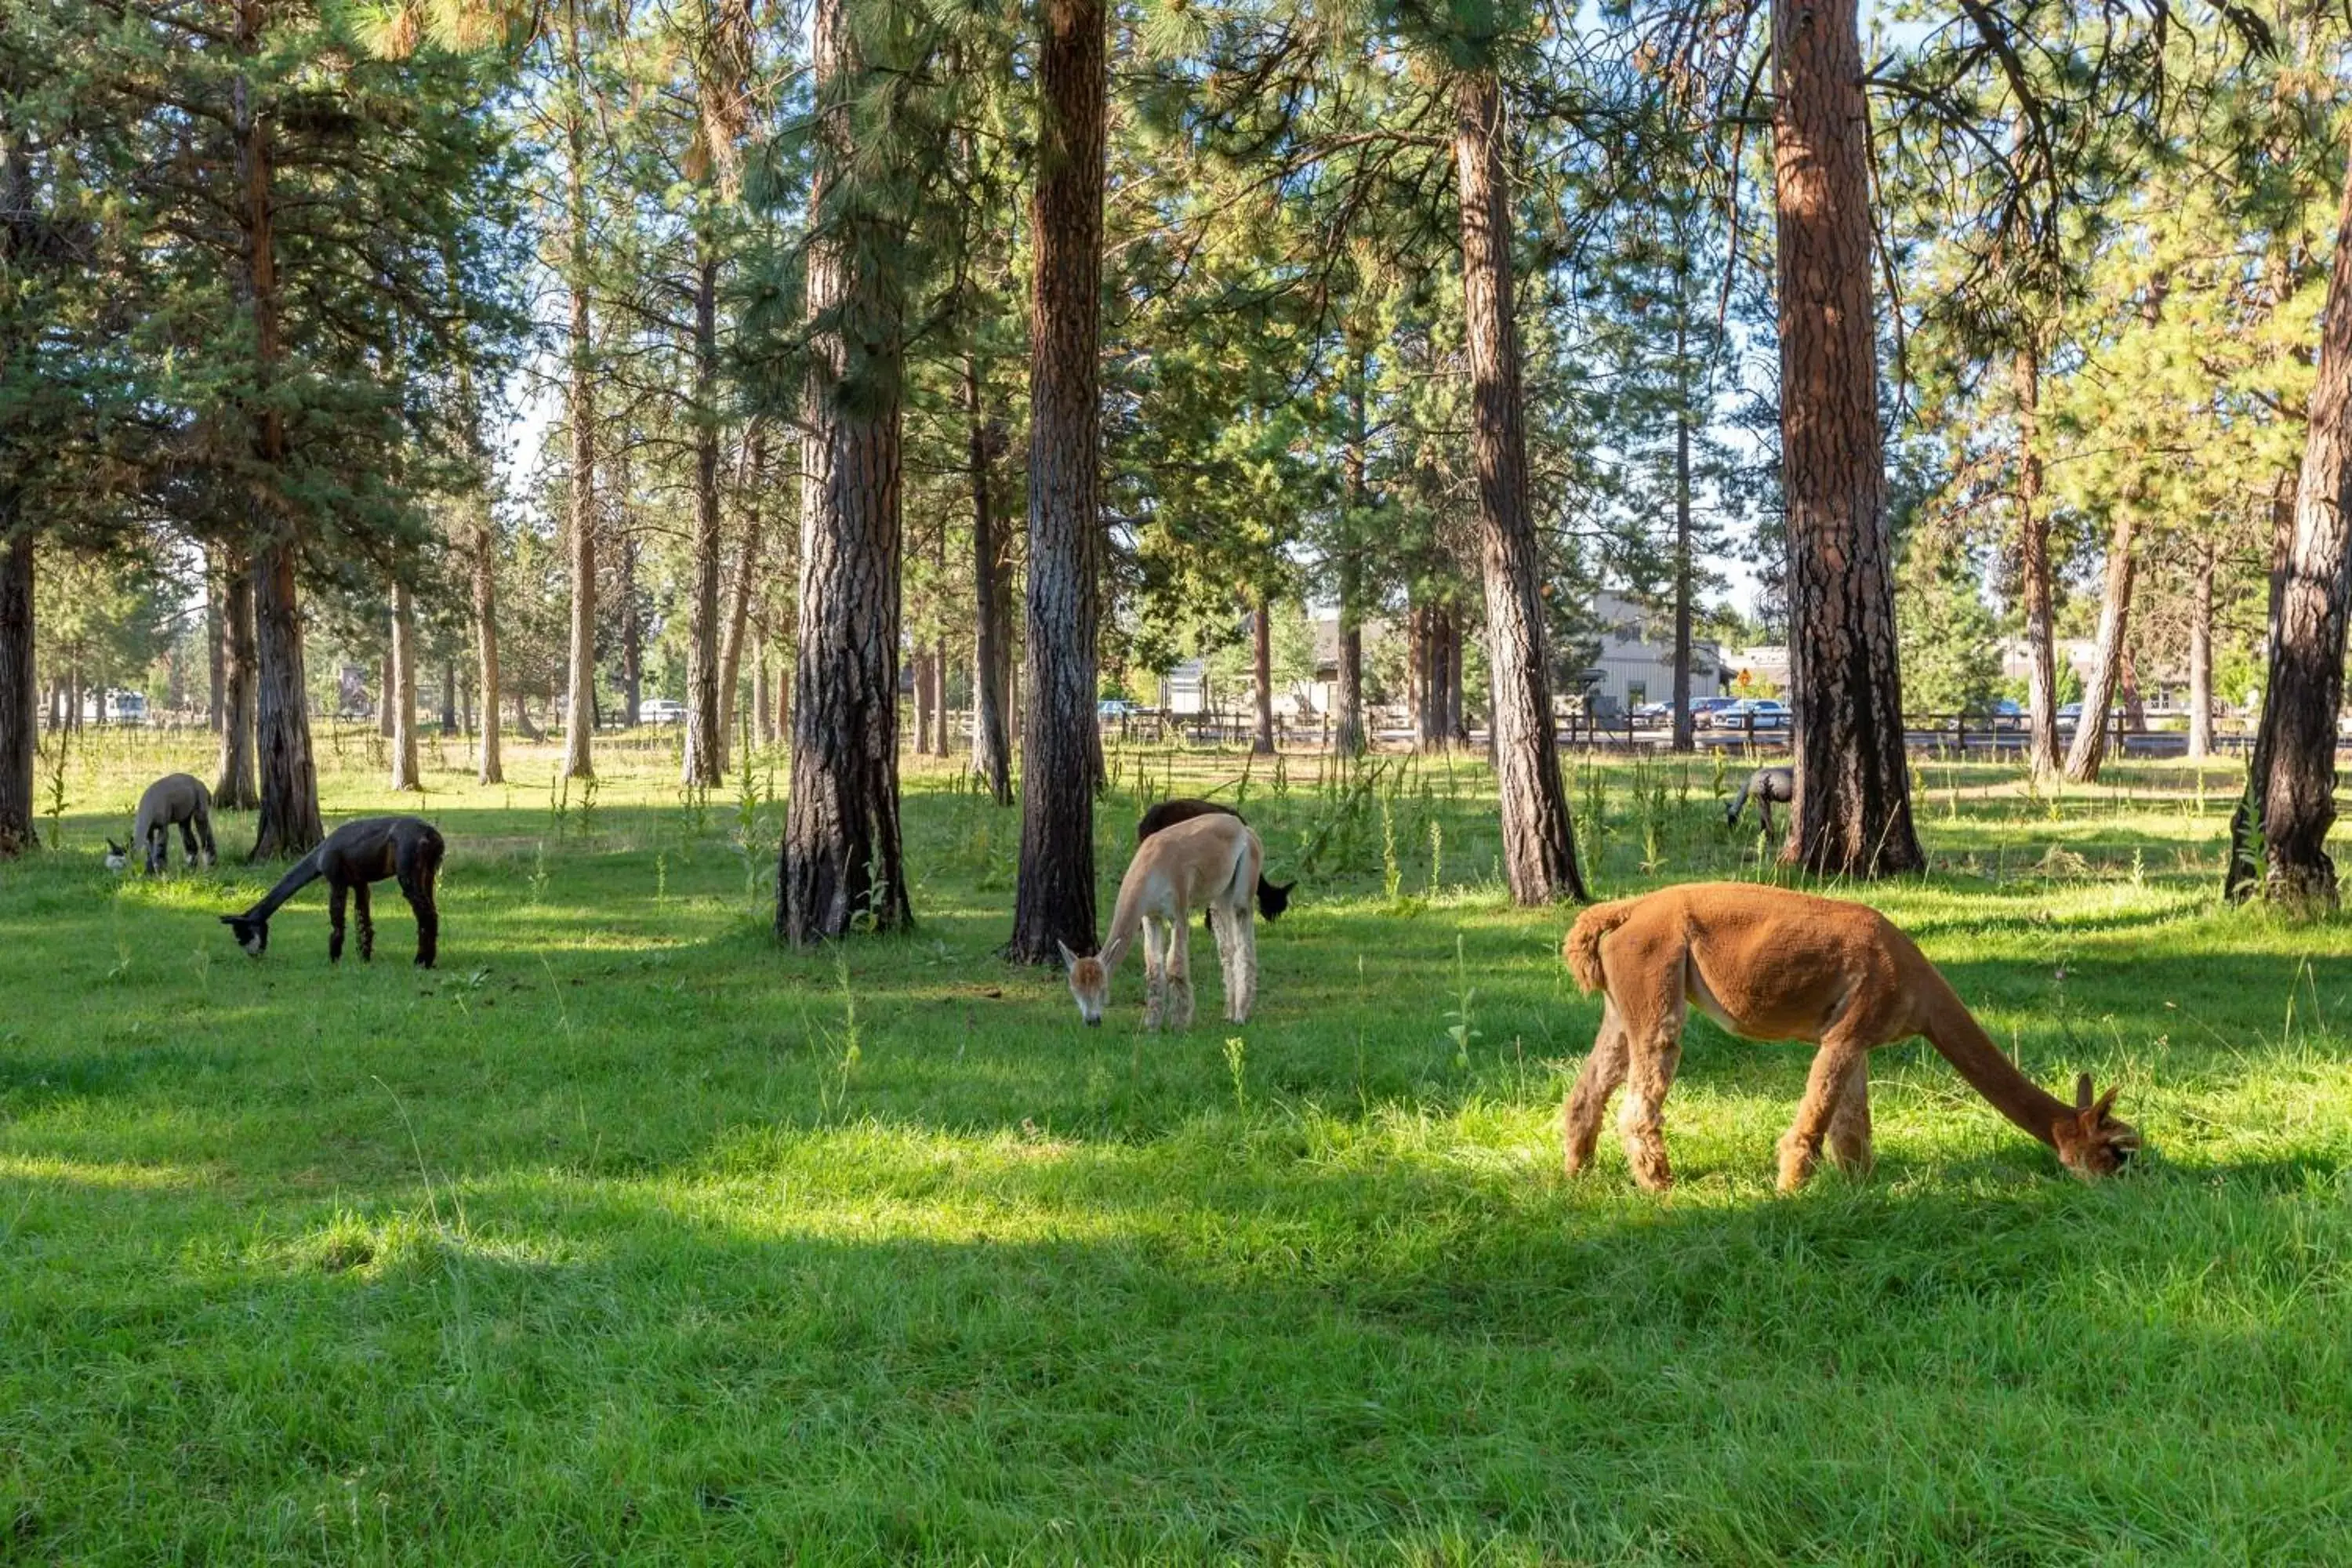 Off site, Other Animals in Best Western Ponderosa Lodge